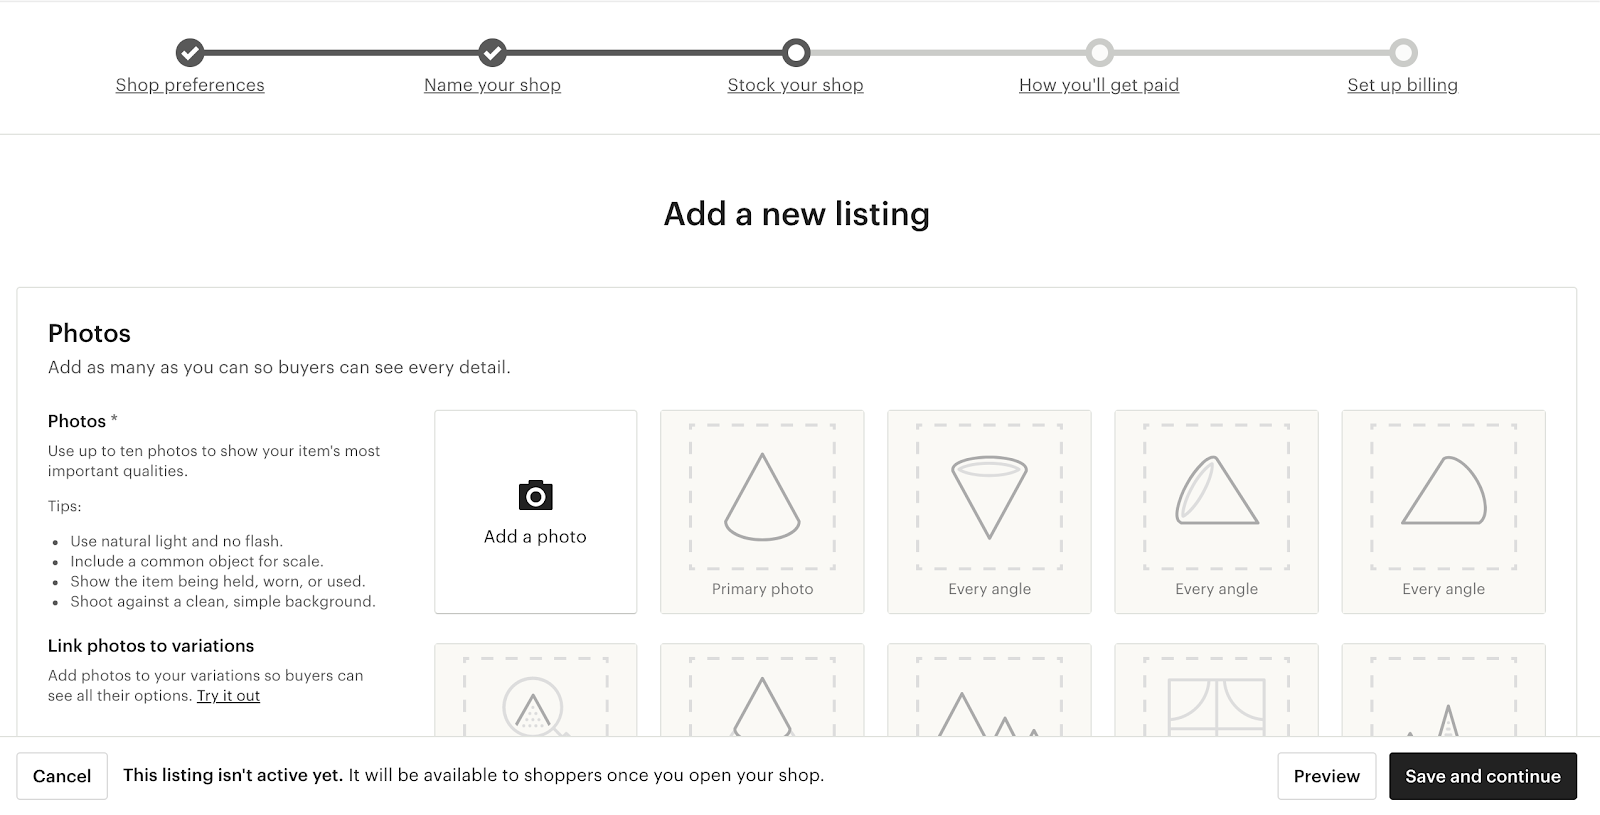 how to start an etsy shop - adding a listing